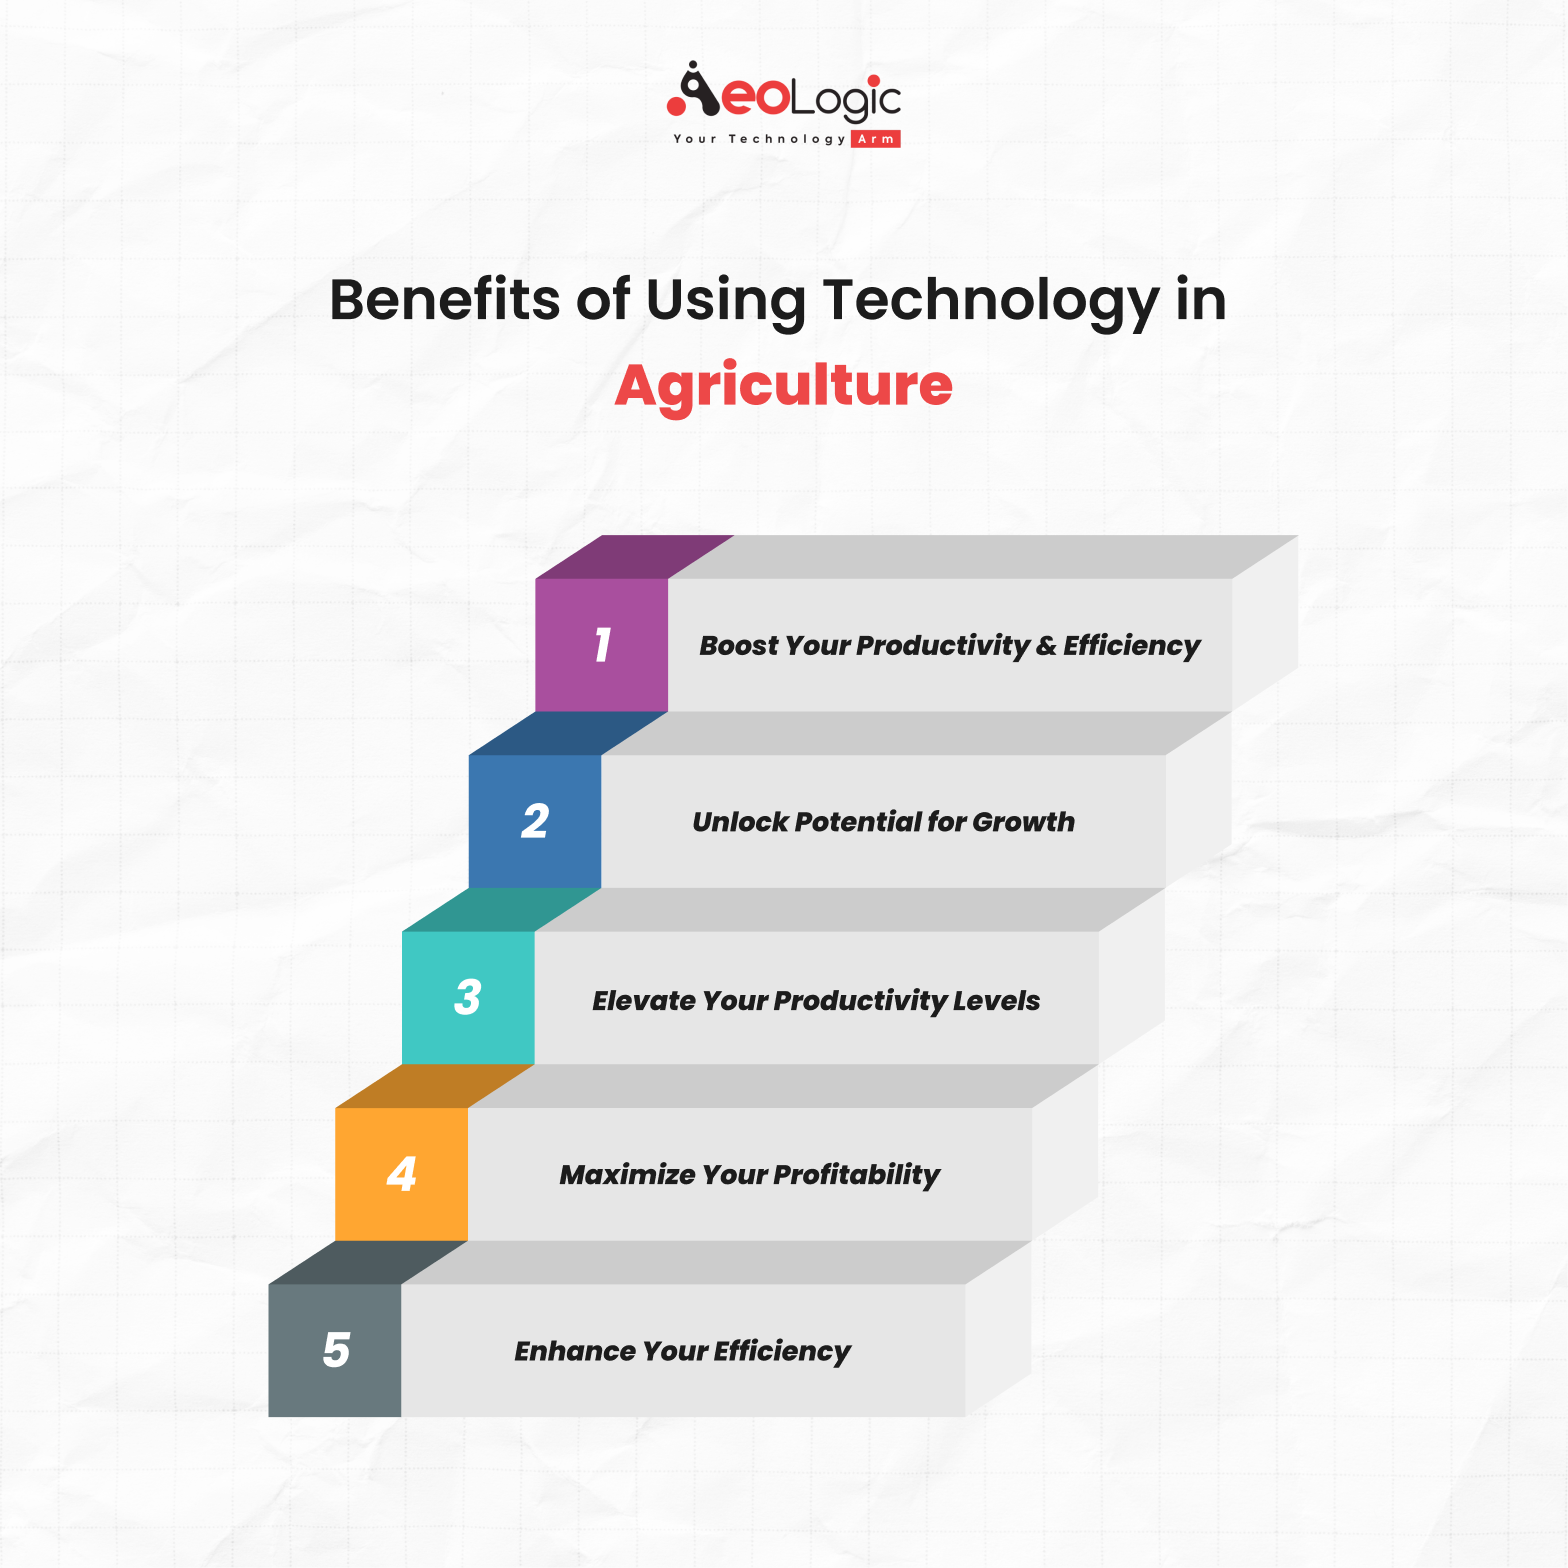 Benefits of Using Technology in Agriculture